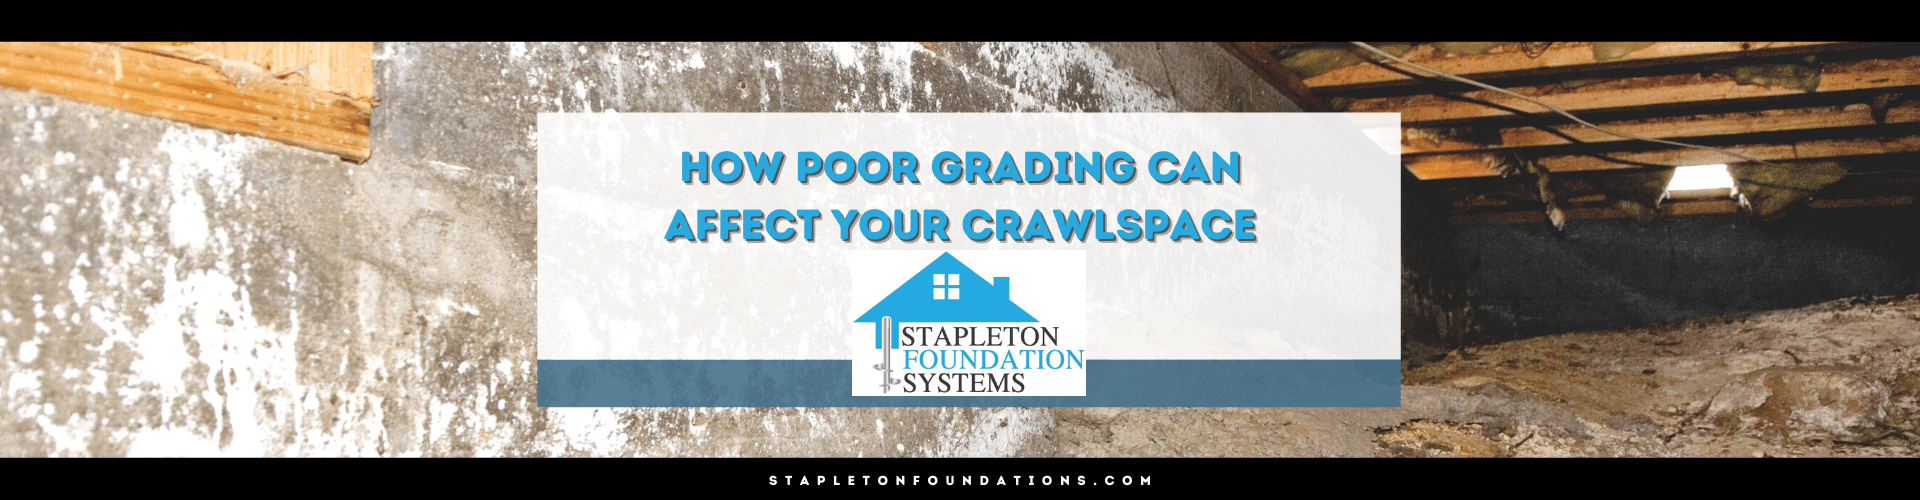 Improper grading can affect your crawlspace